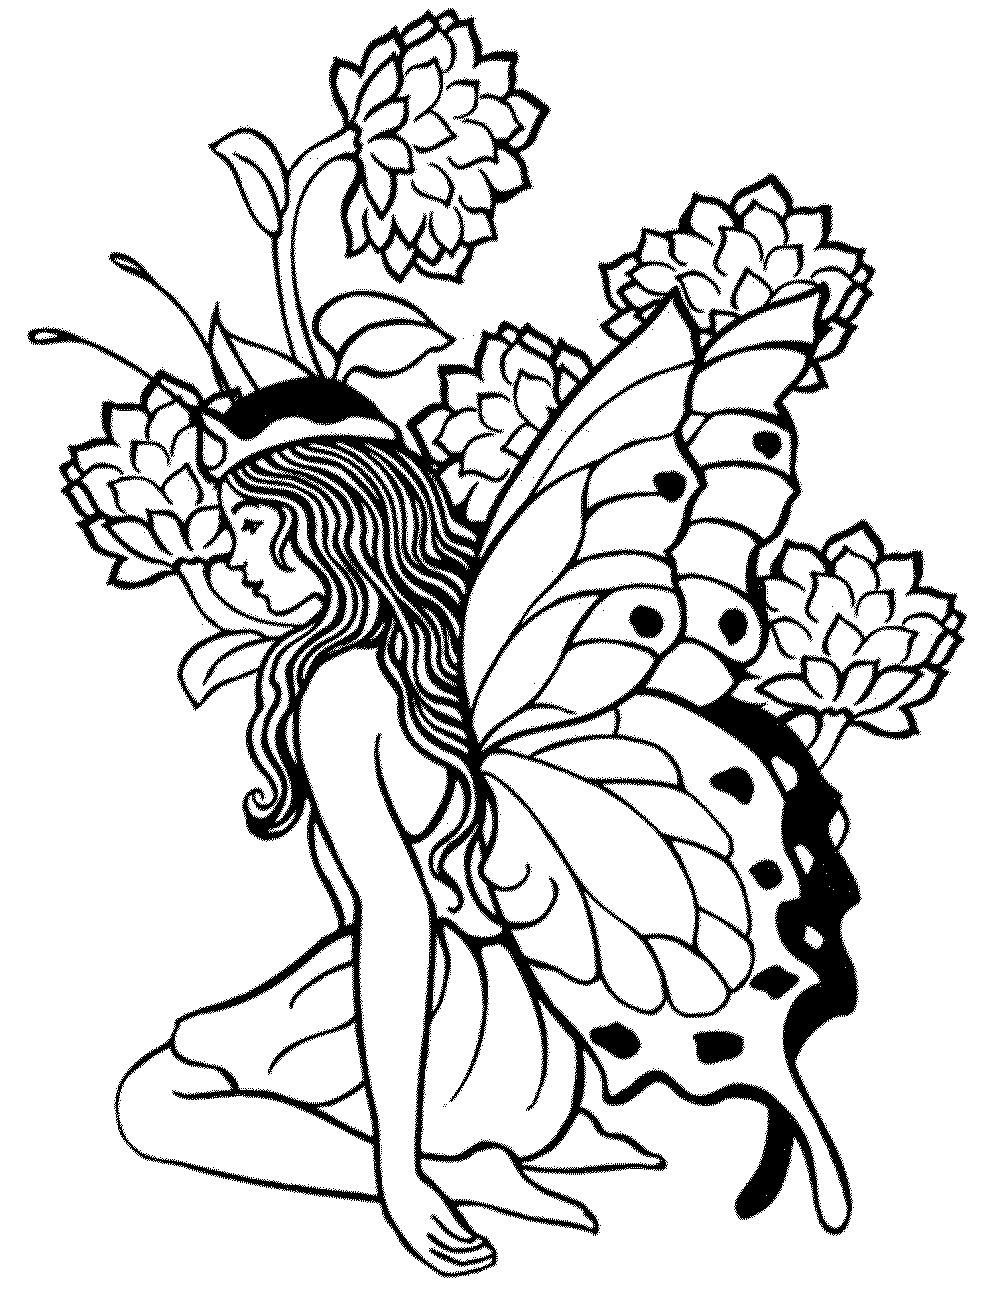 Coloring Pages Ideas Fairying Pages To Print Free For Adults Dark Free Printable Coloring